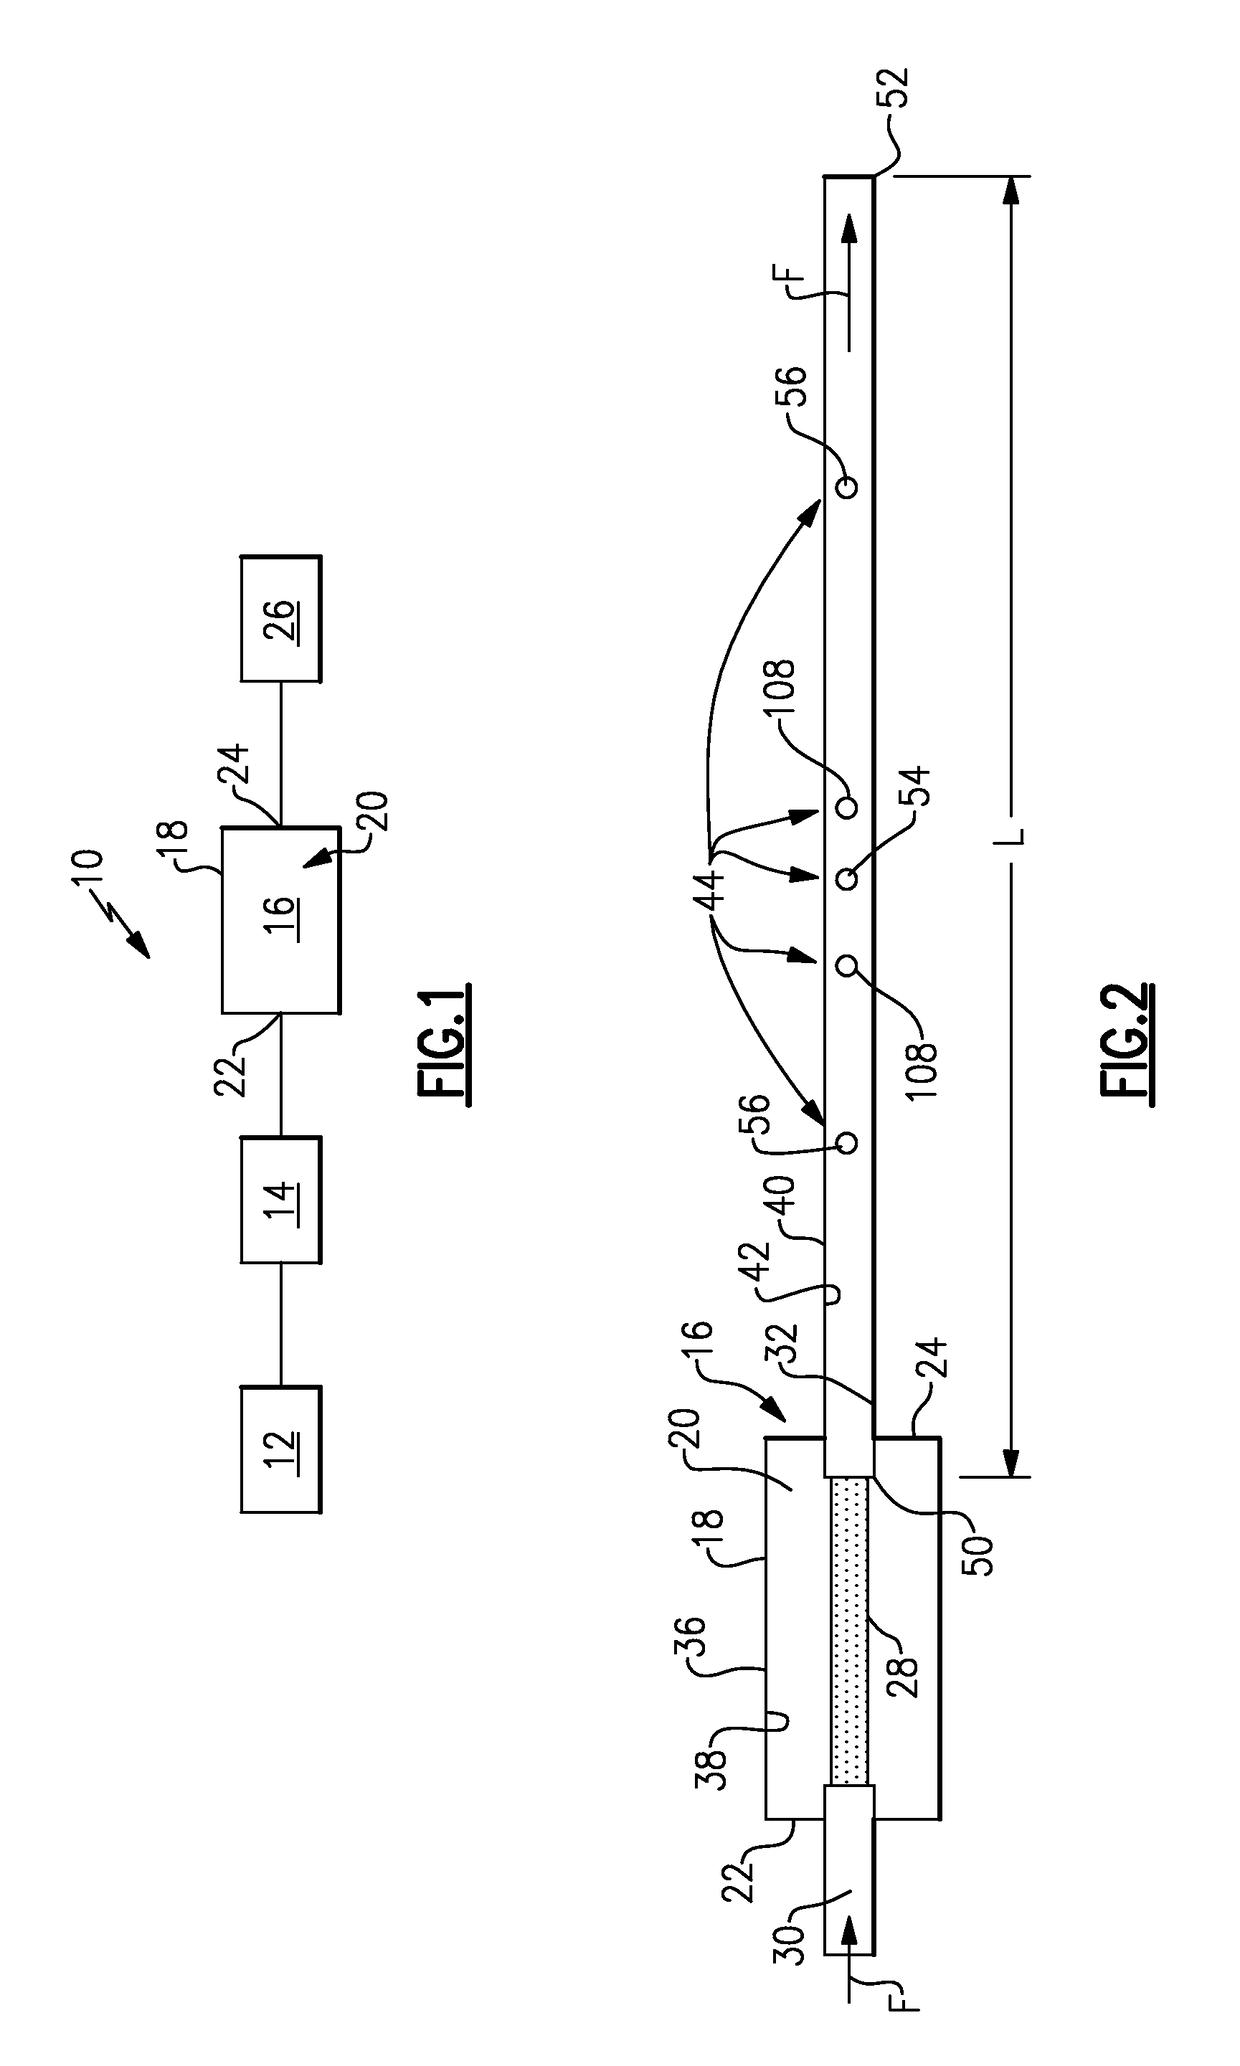 Vehicle exhaust system with resonance damping